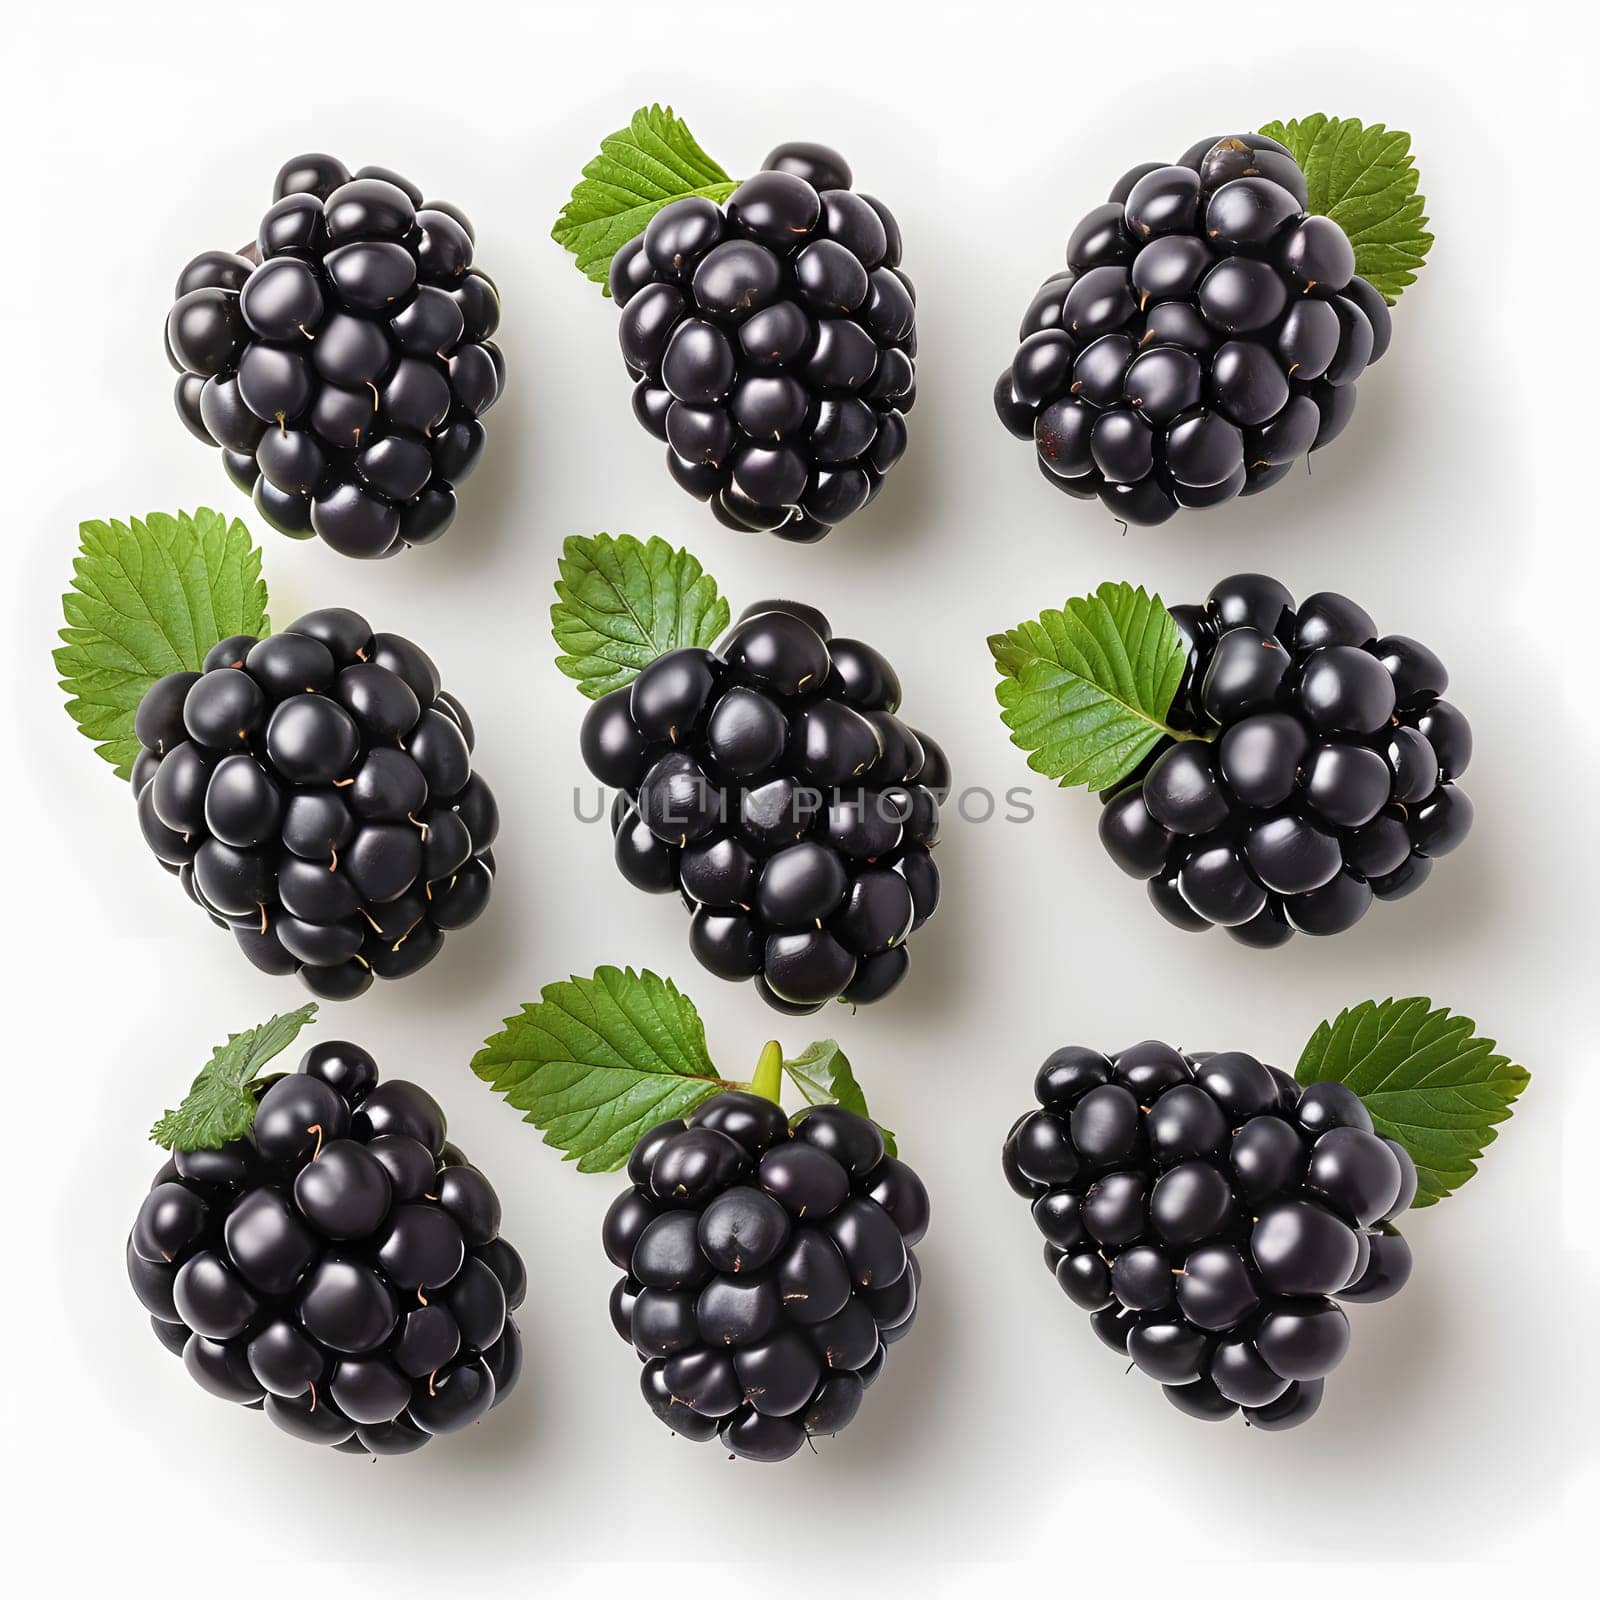 A cluster of ripe blackberries with green leaves, a type of berry from the bramble plant. These seedless fruits are a popular natural food, similar to boysenberries and olallieberries